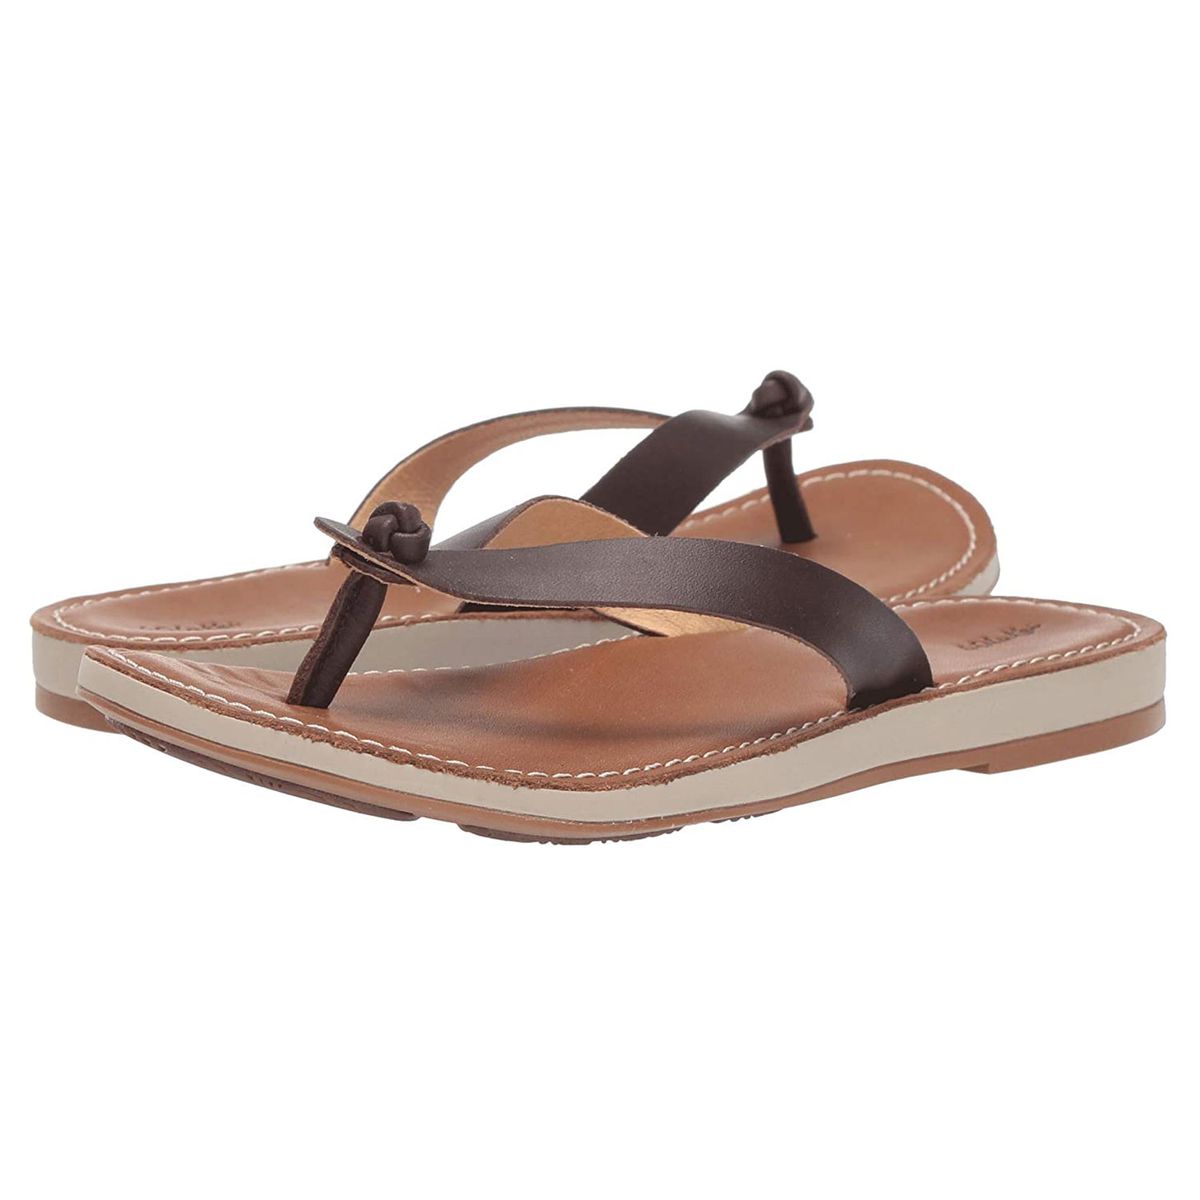 Comfortable Sandals for Women